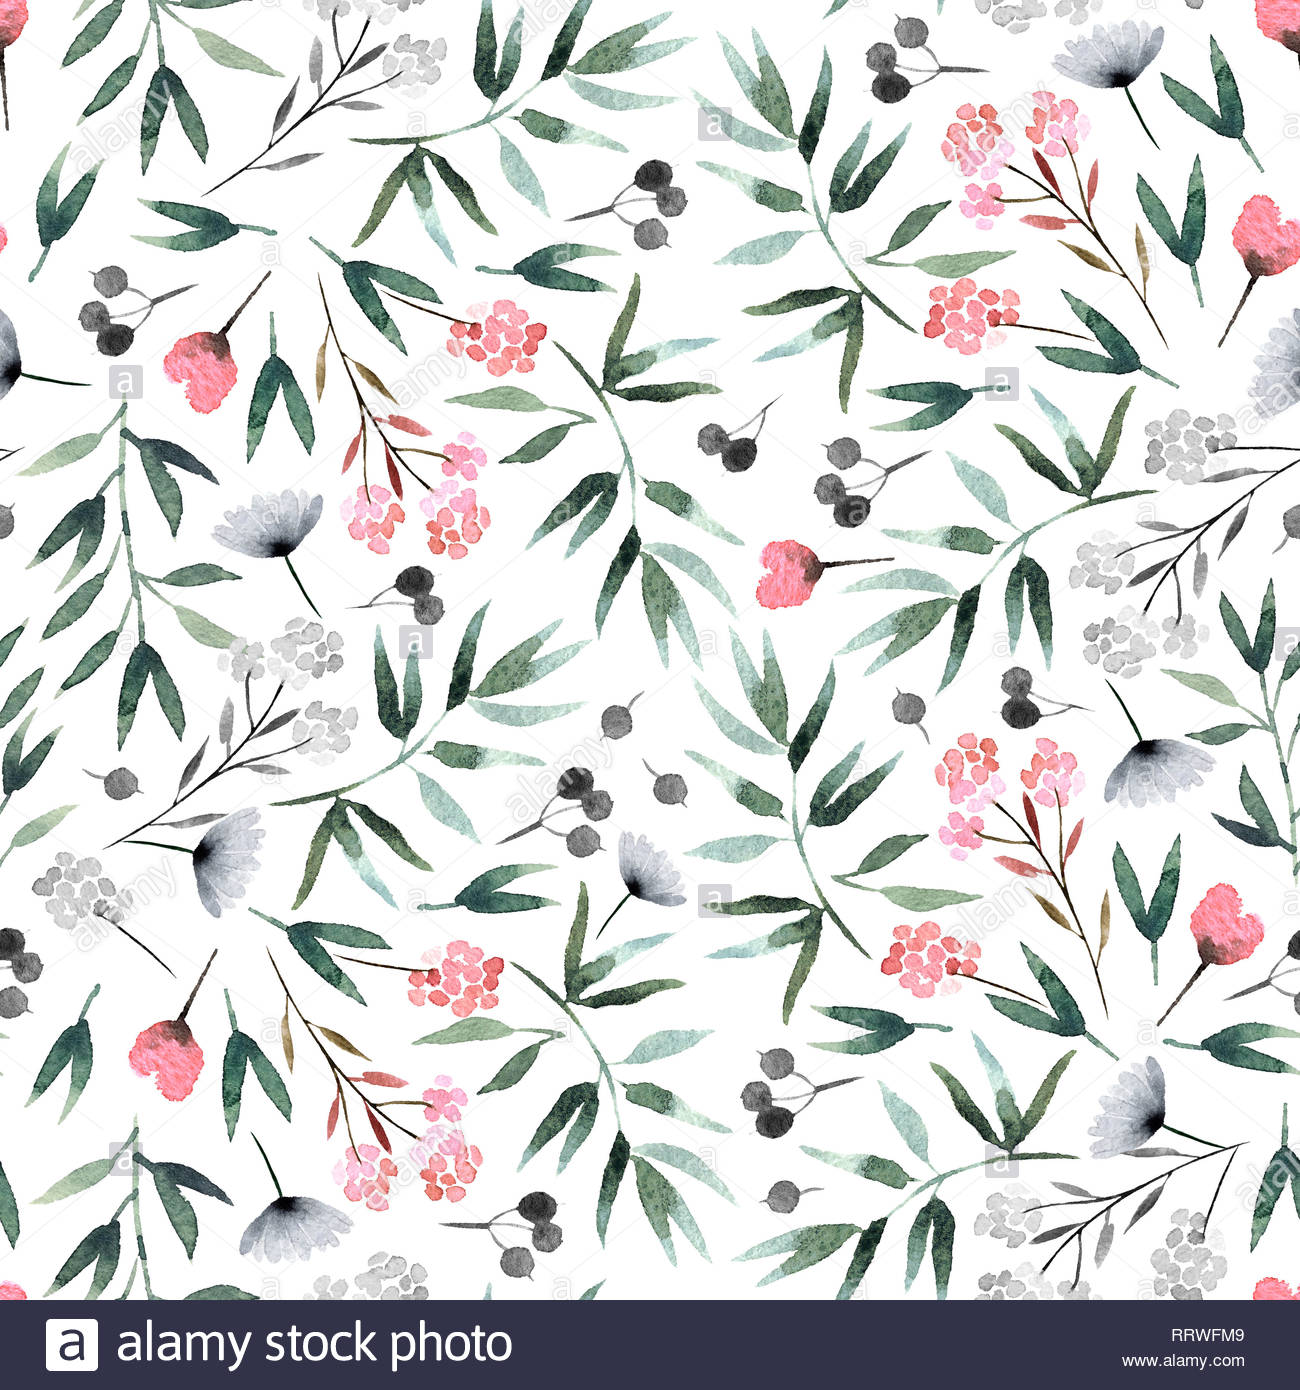 Isolated On White Background Seamless Pattern With Flora For Your